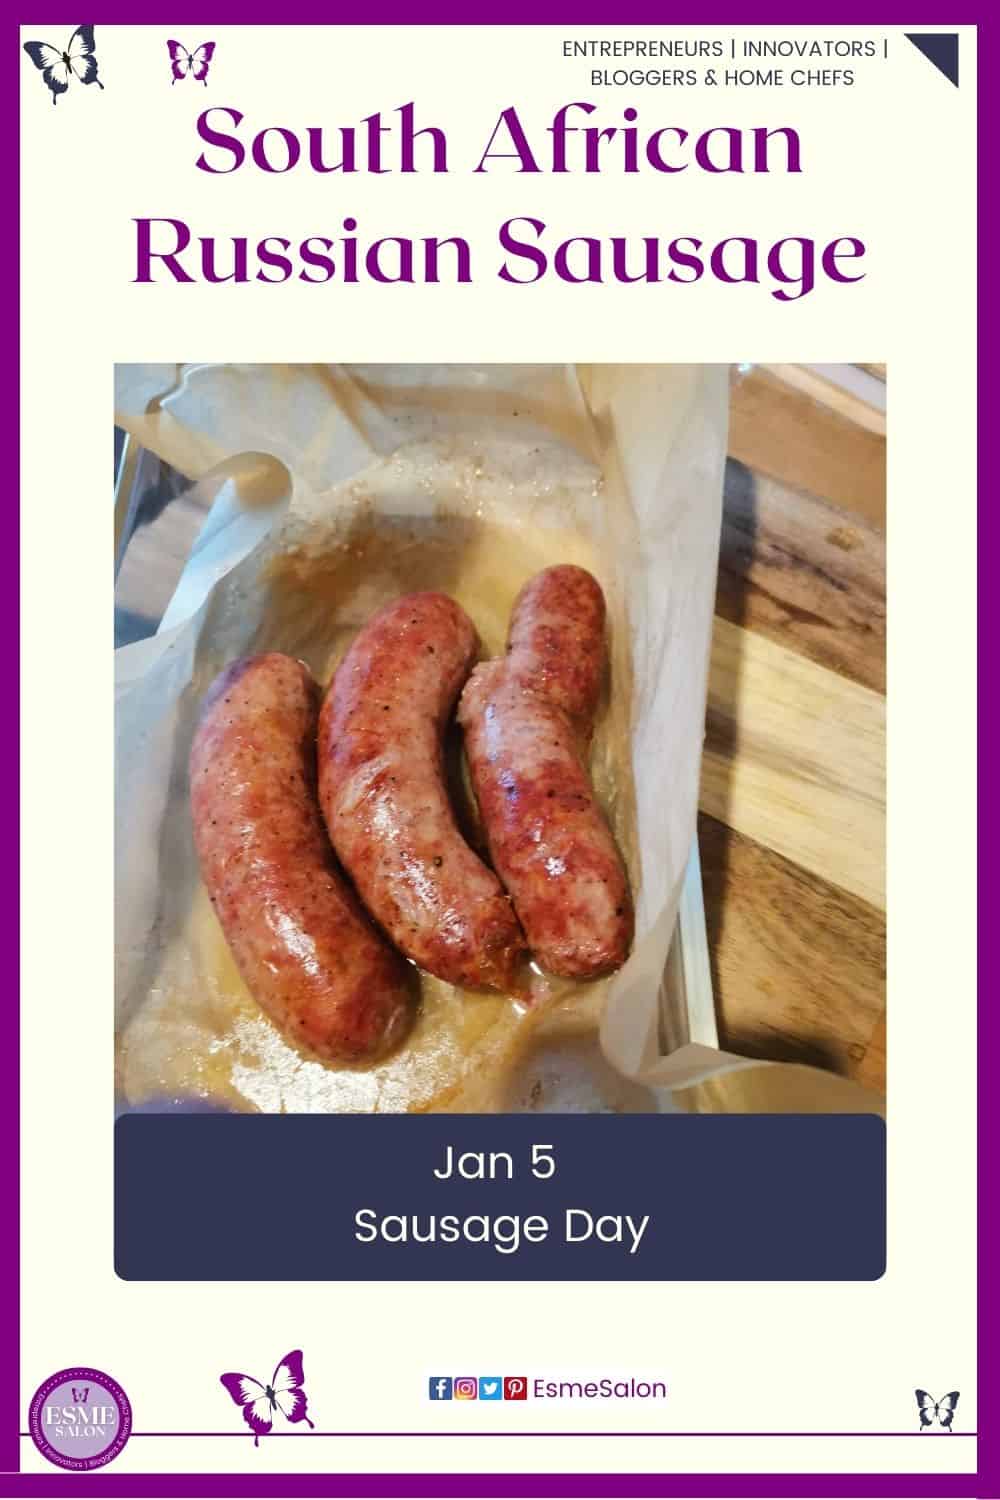 an image of South African Russian Sausages